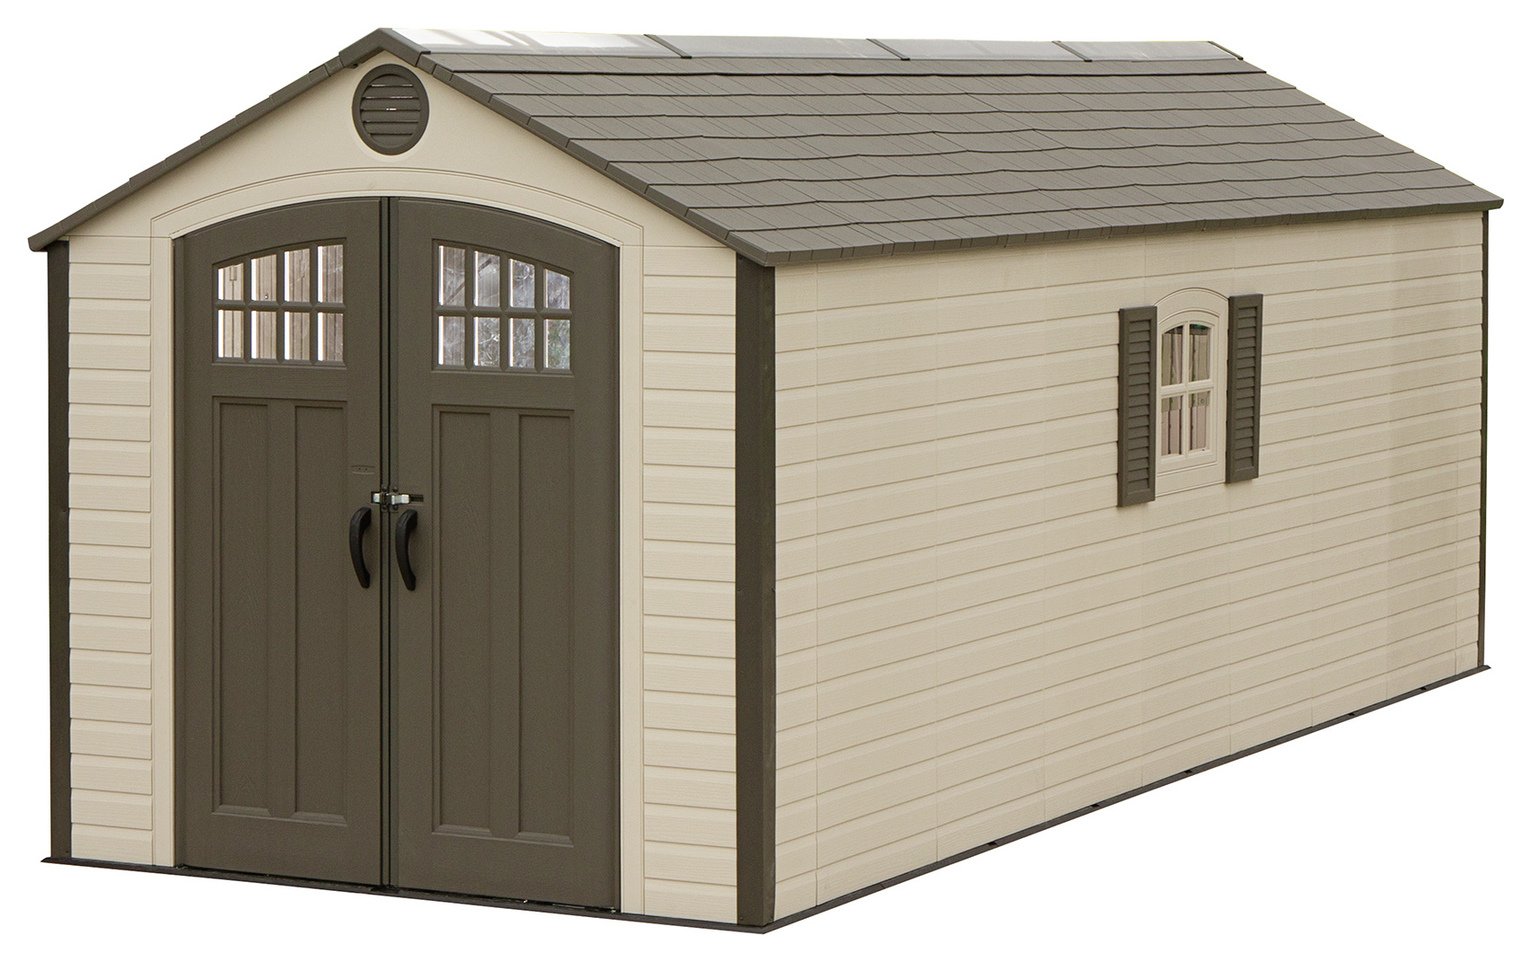 Lifetime 8x20ft Plastic Outdoor Storage Shed